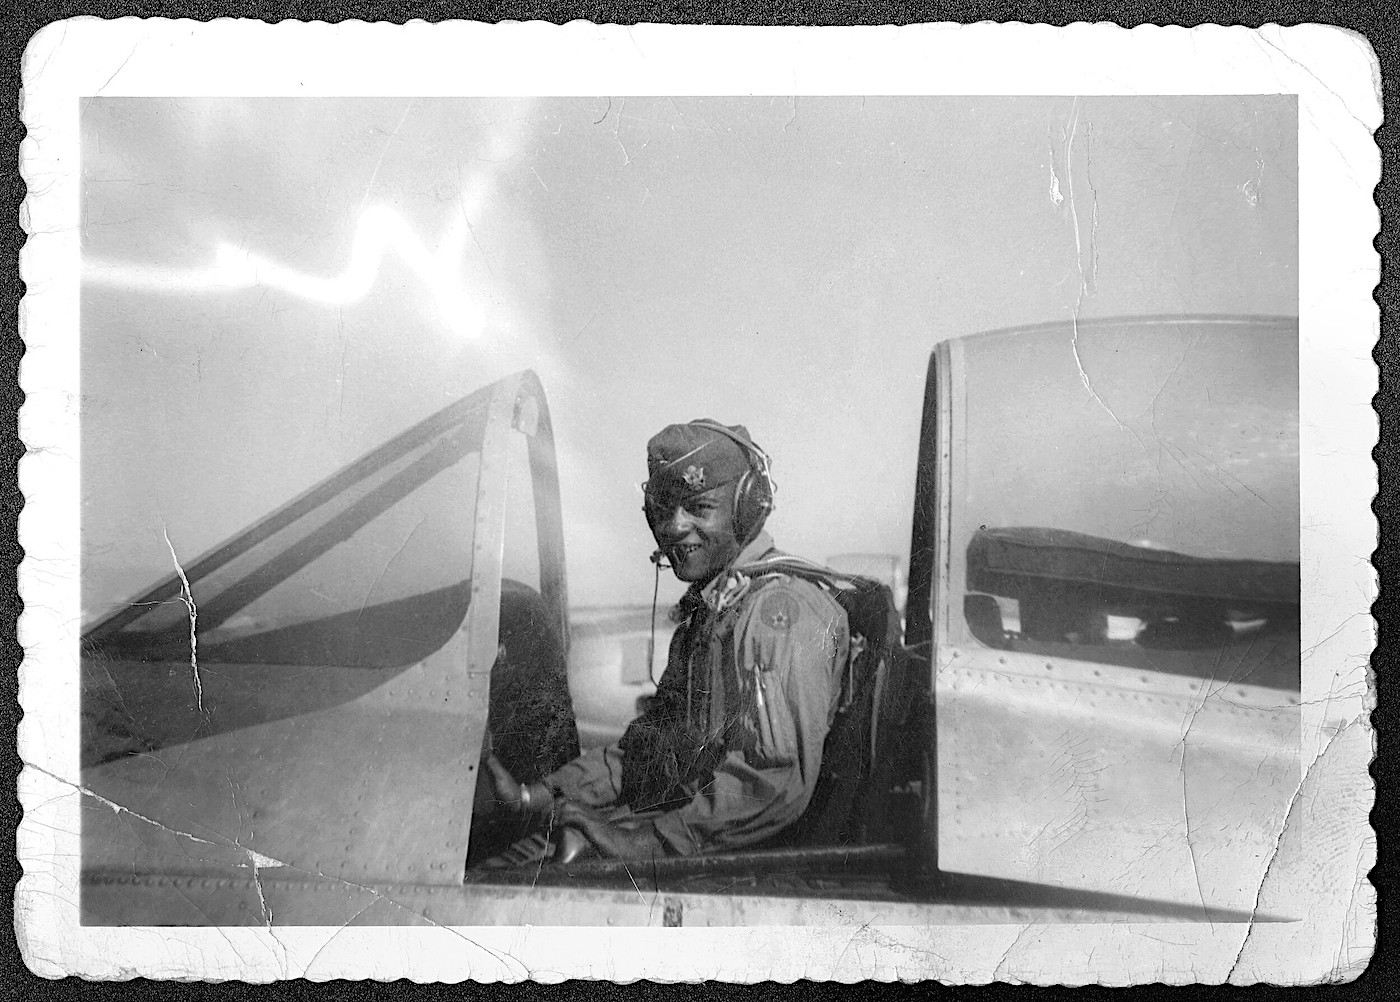 Air Force Captain Ed Dwight in the cockpit at the beginning of his flight training in 1954